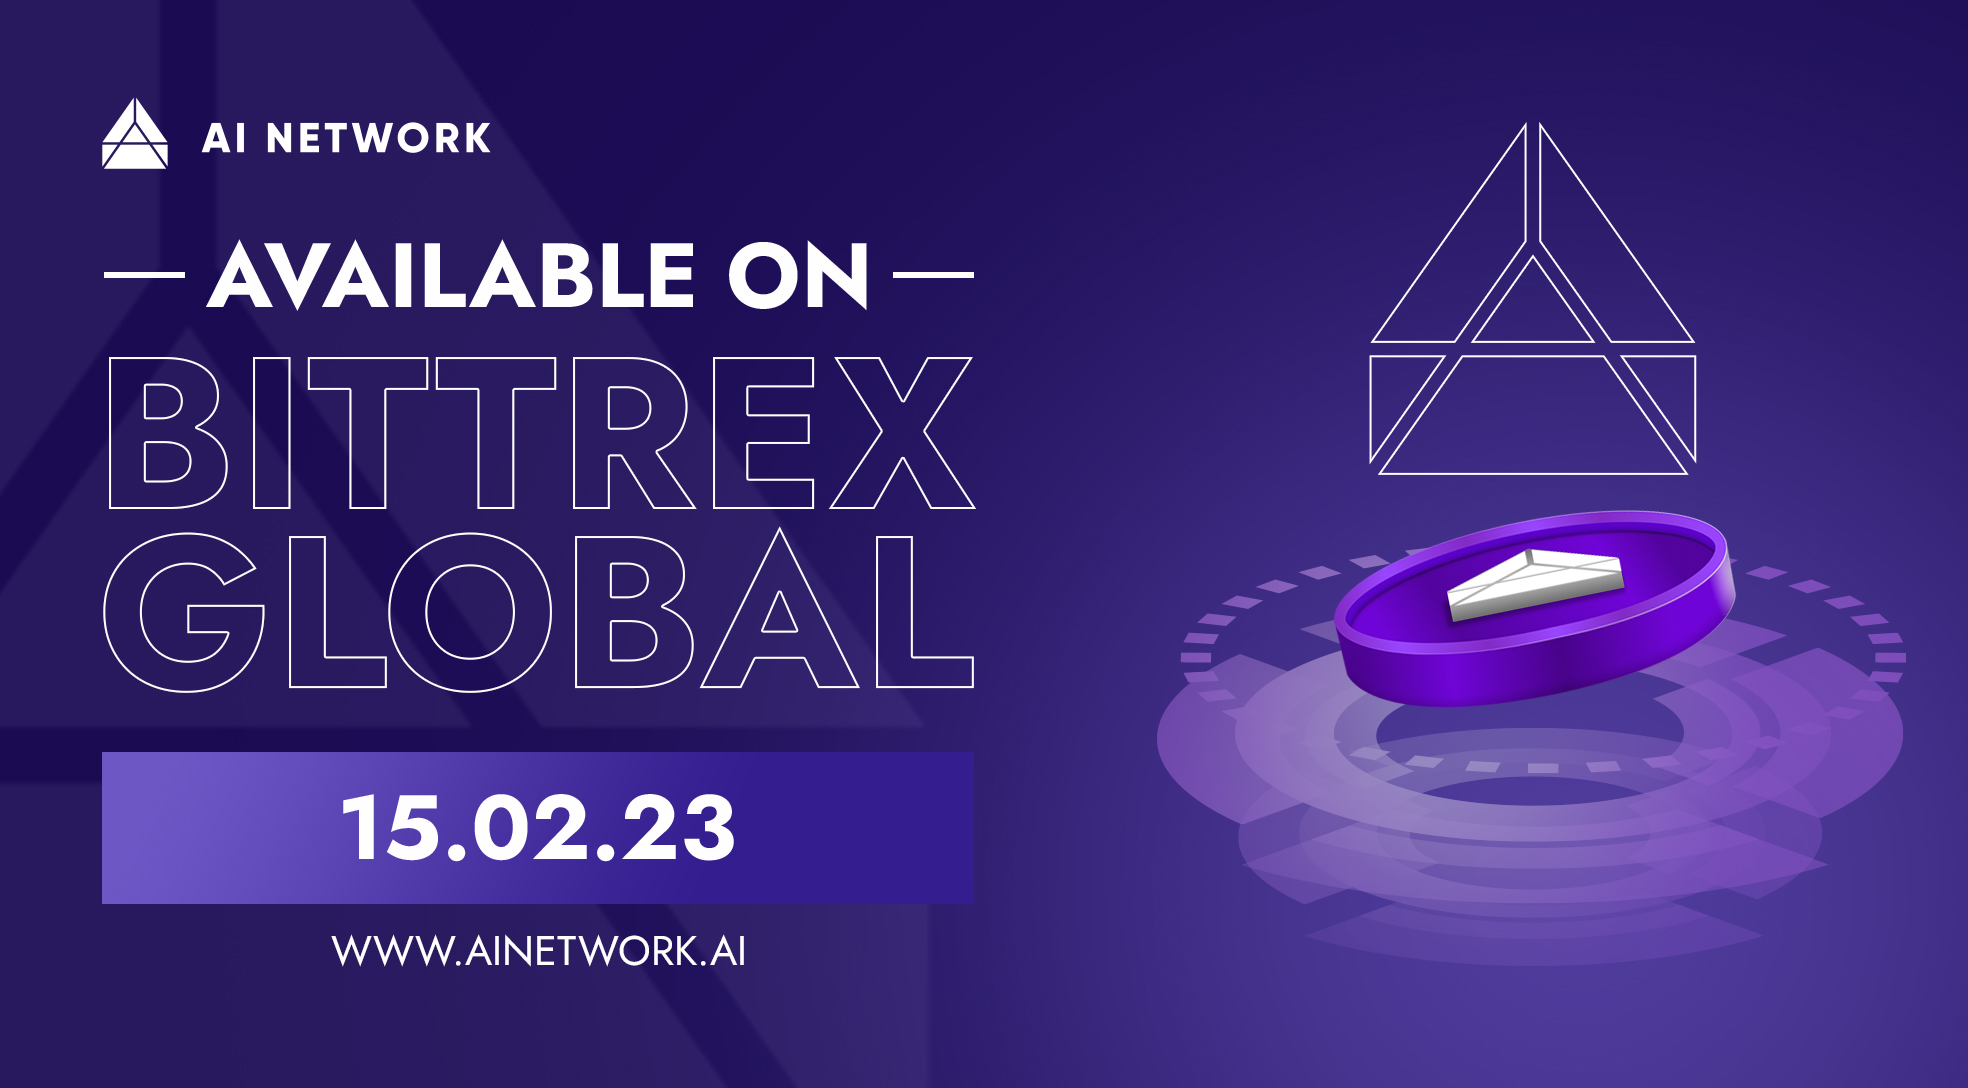 AI Network Celebrates Valentine’s Day with Launch on Bittrex Global